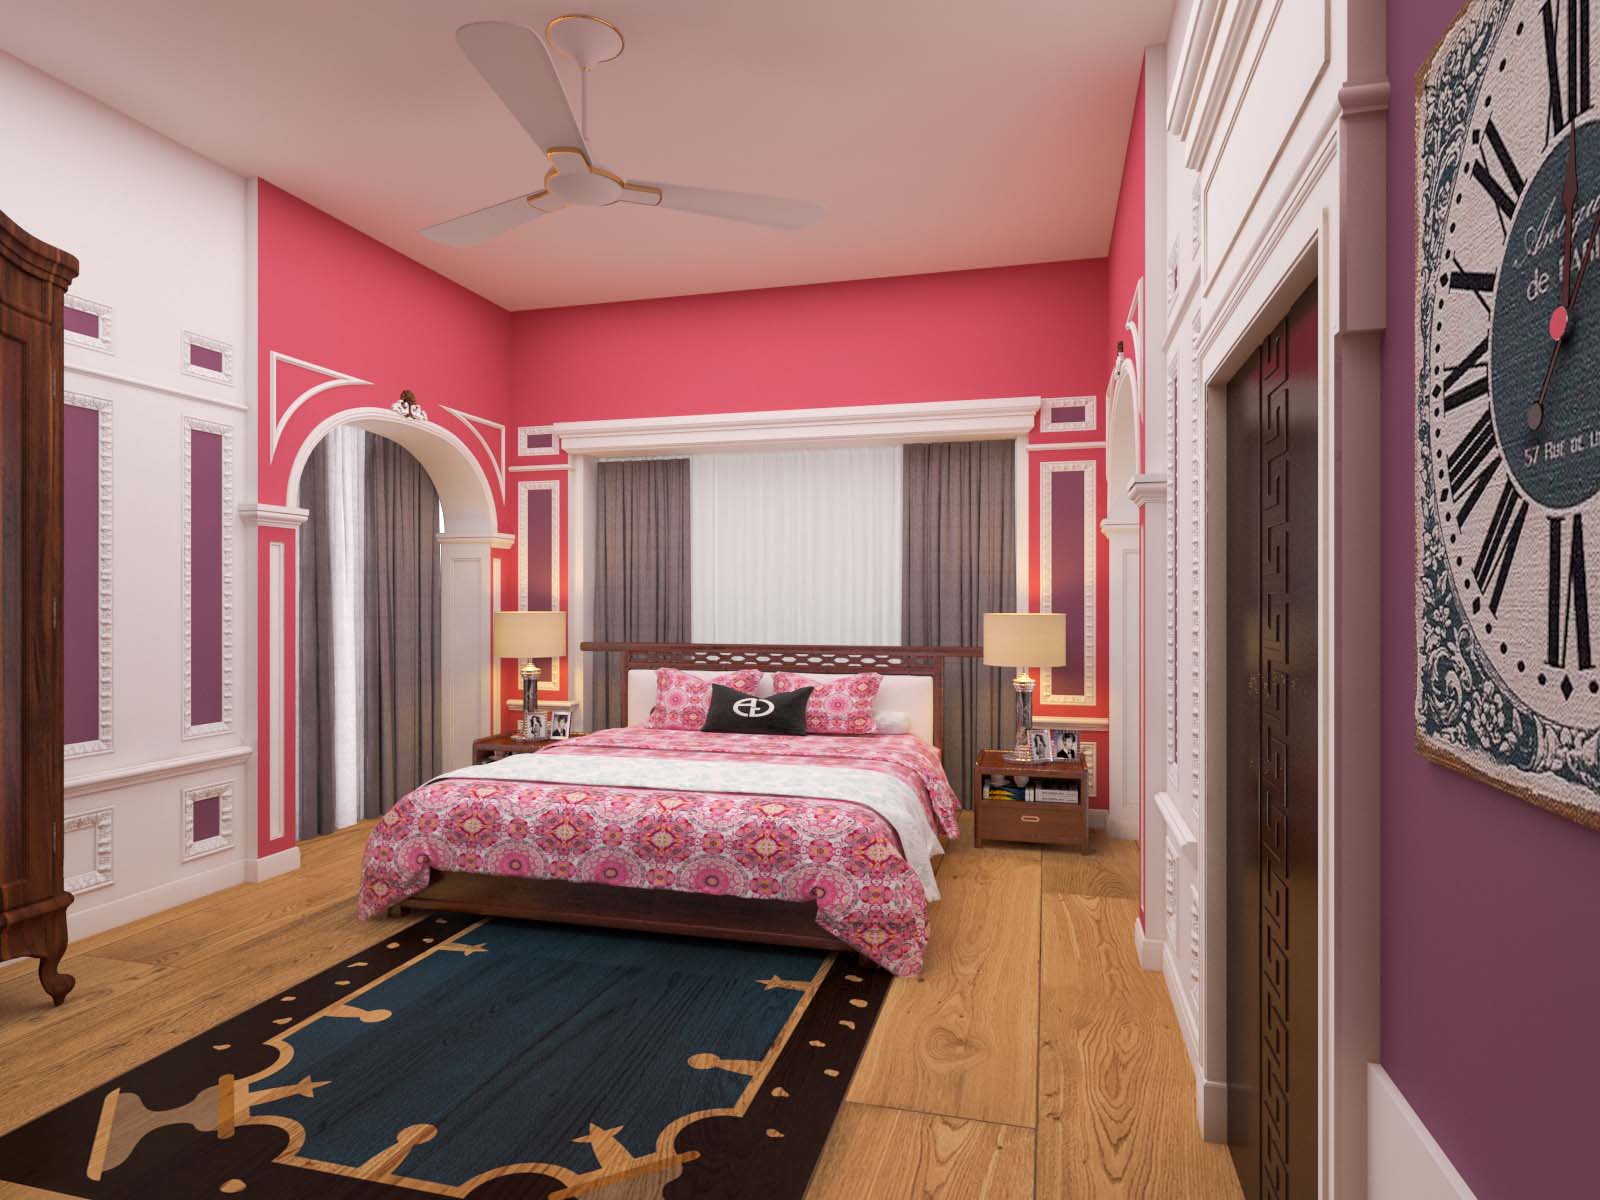 Professional Paints Designs for Your Bedroom